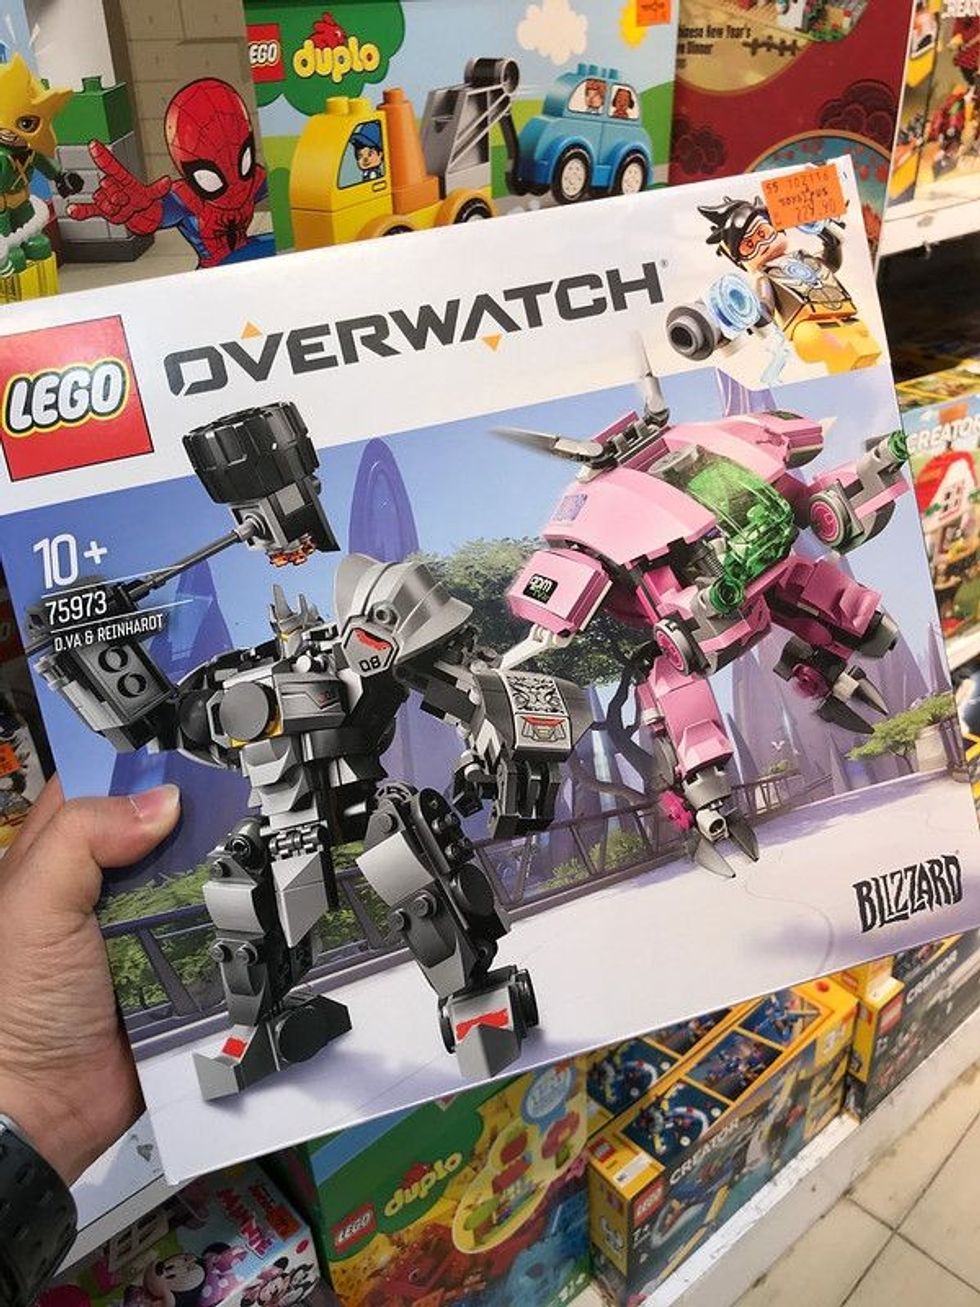 New series of Lego, special edition Overwatch character D.VA & Reinhardt